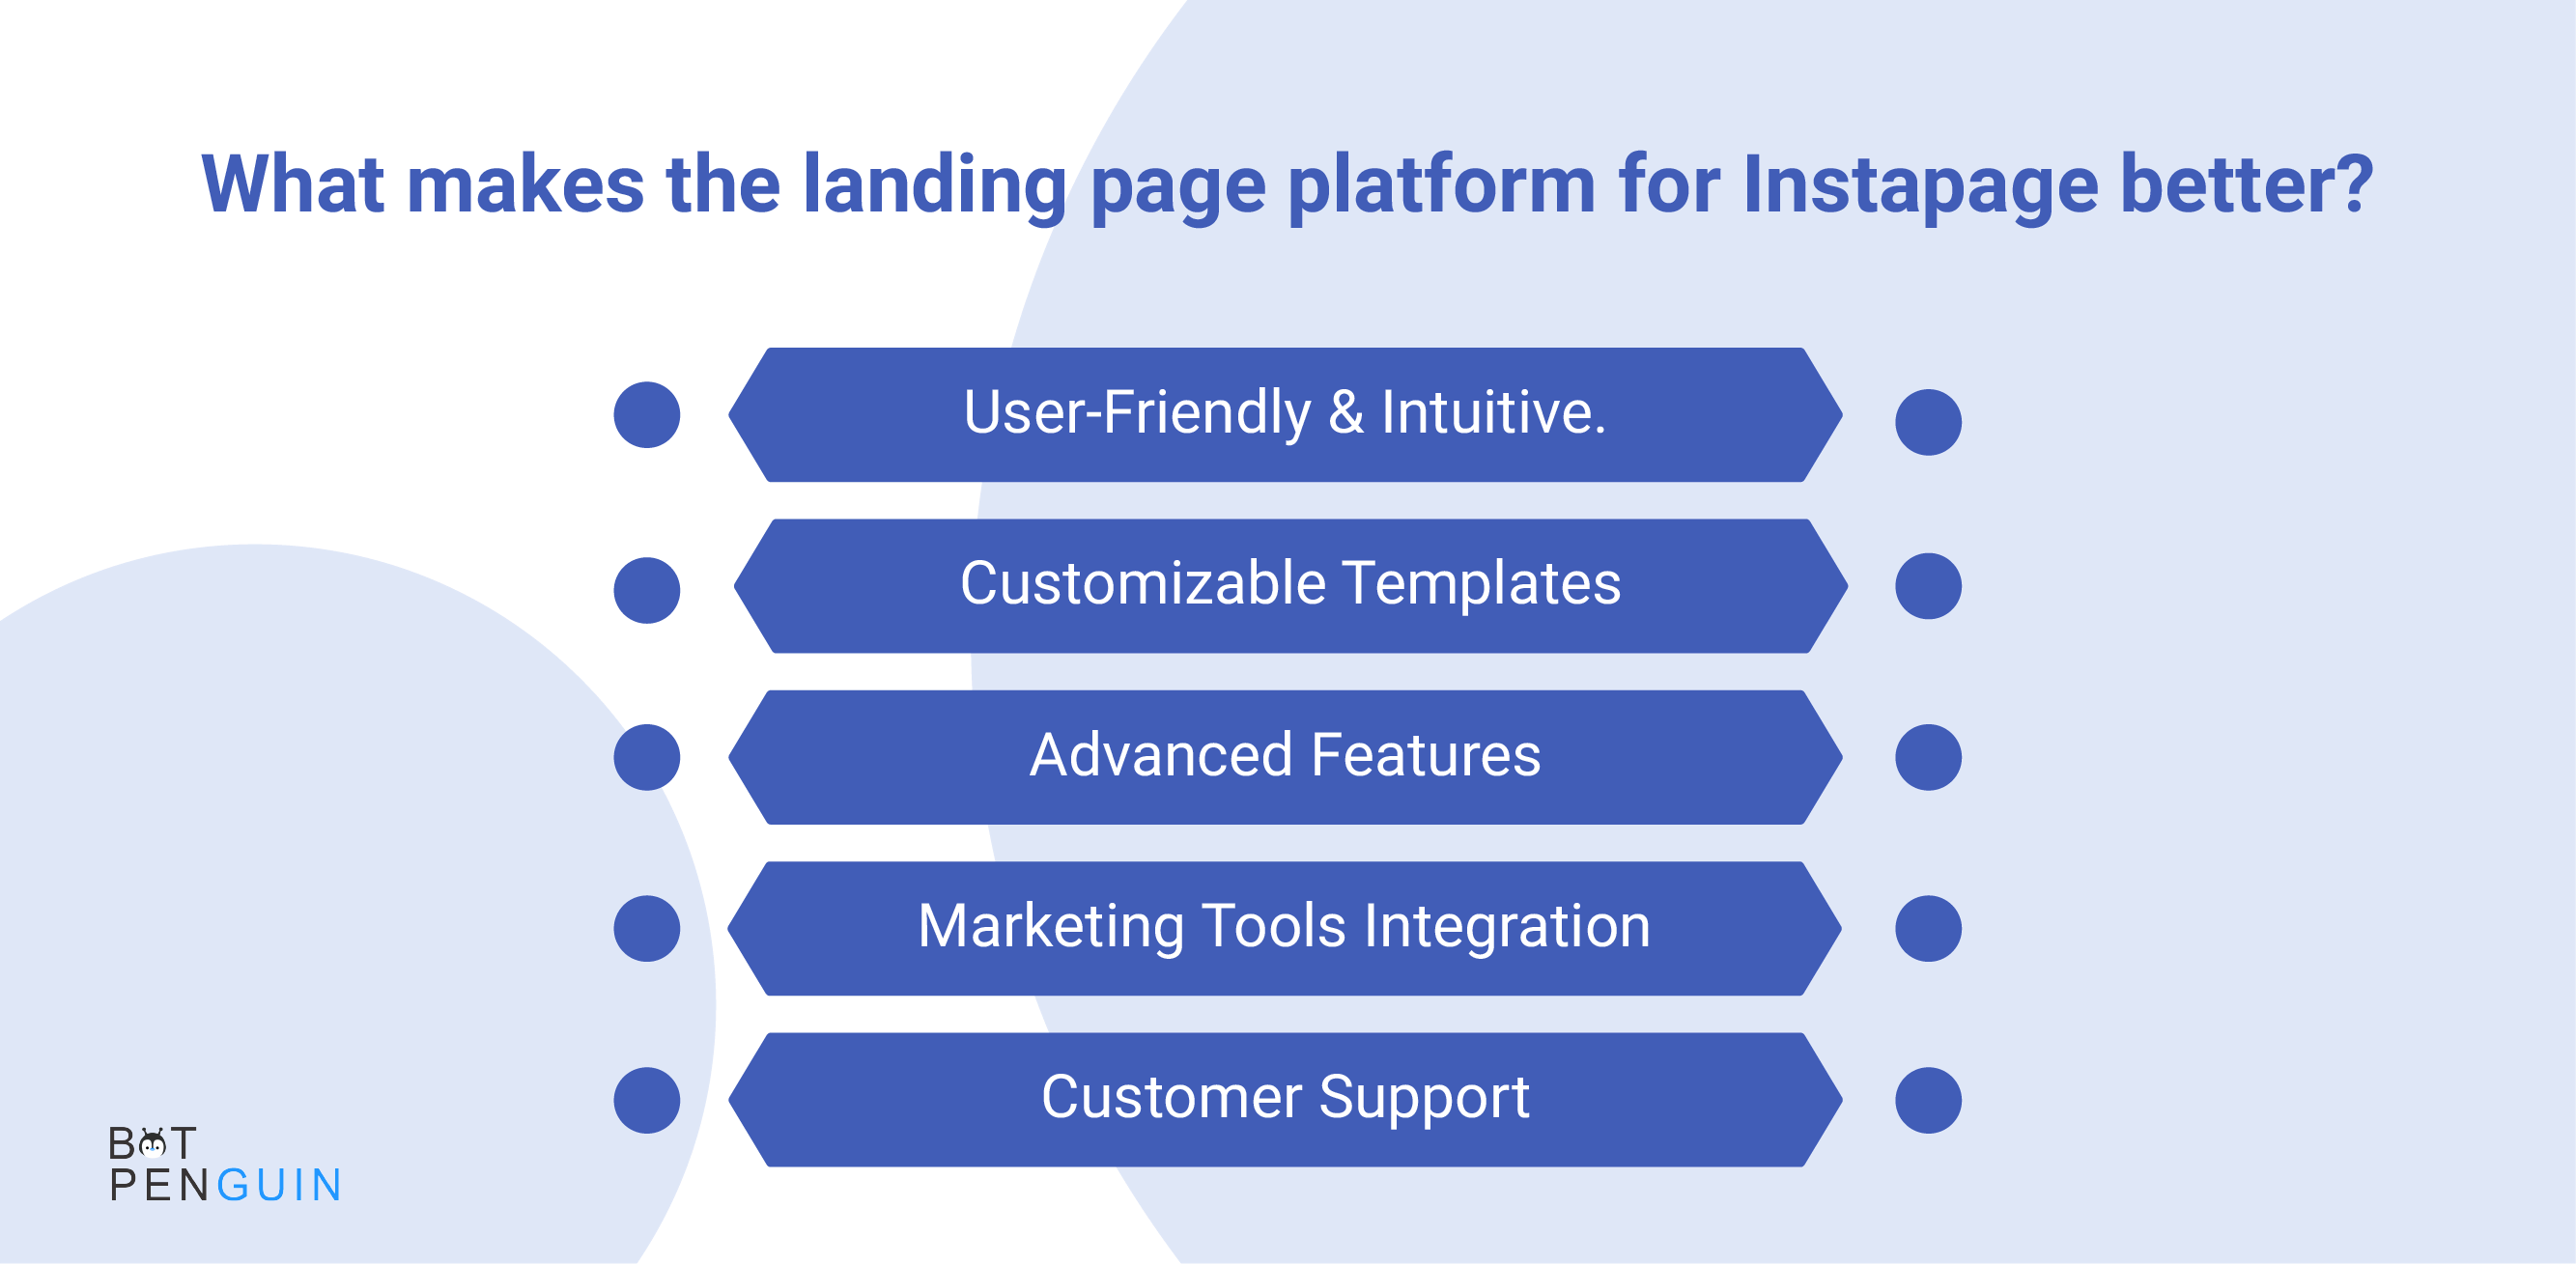 What makes the landing page platform for Instapage better?